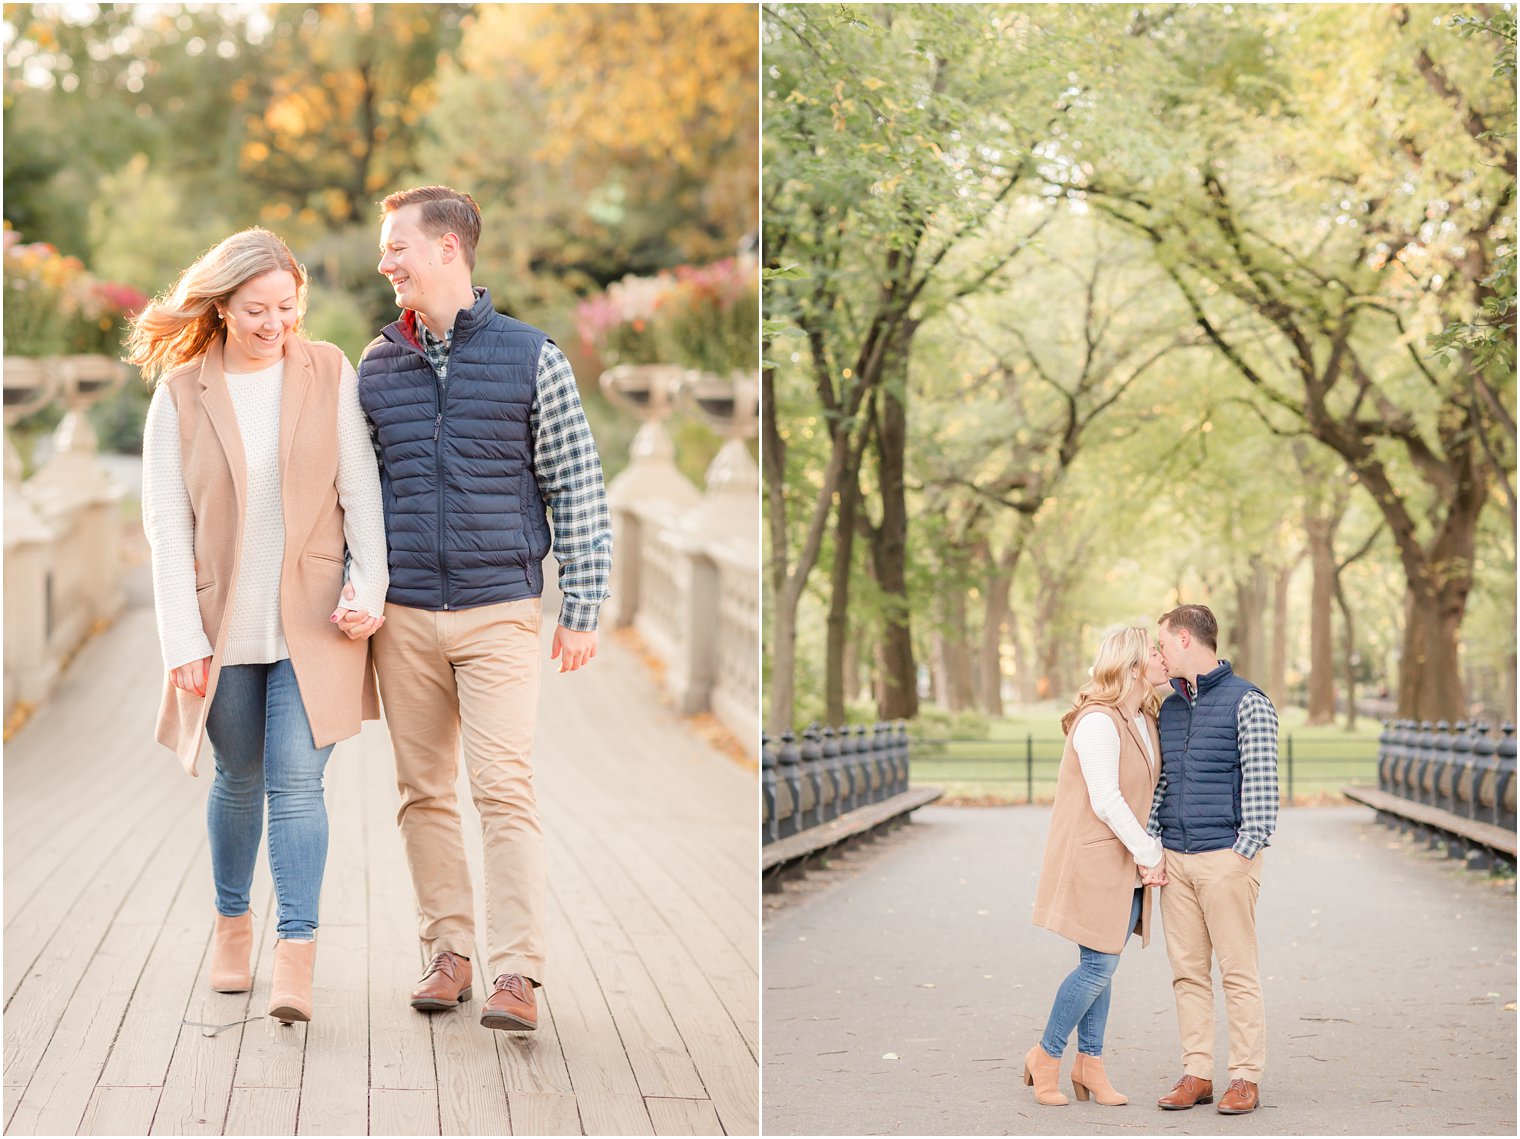 Candid photos of engaged couple in Central Park